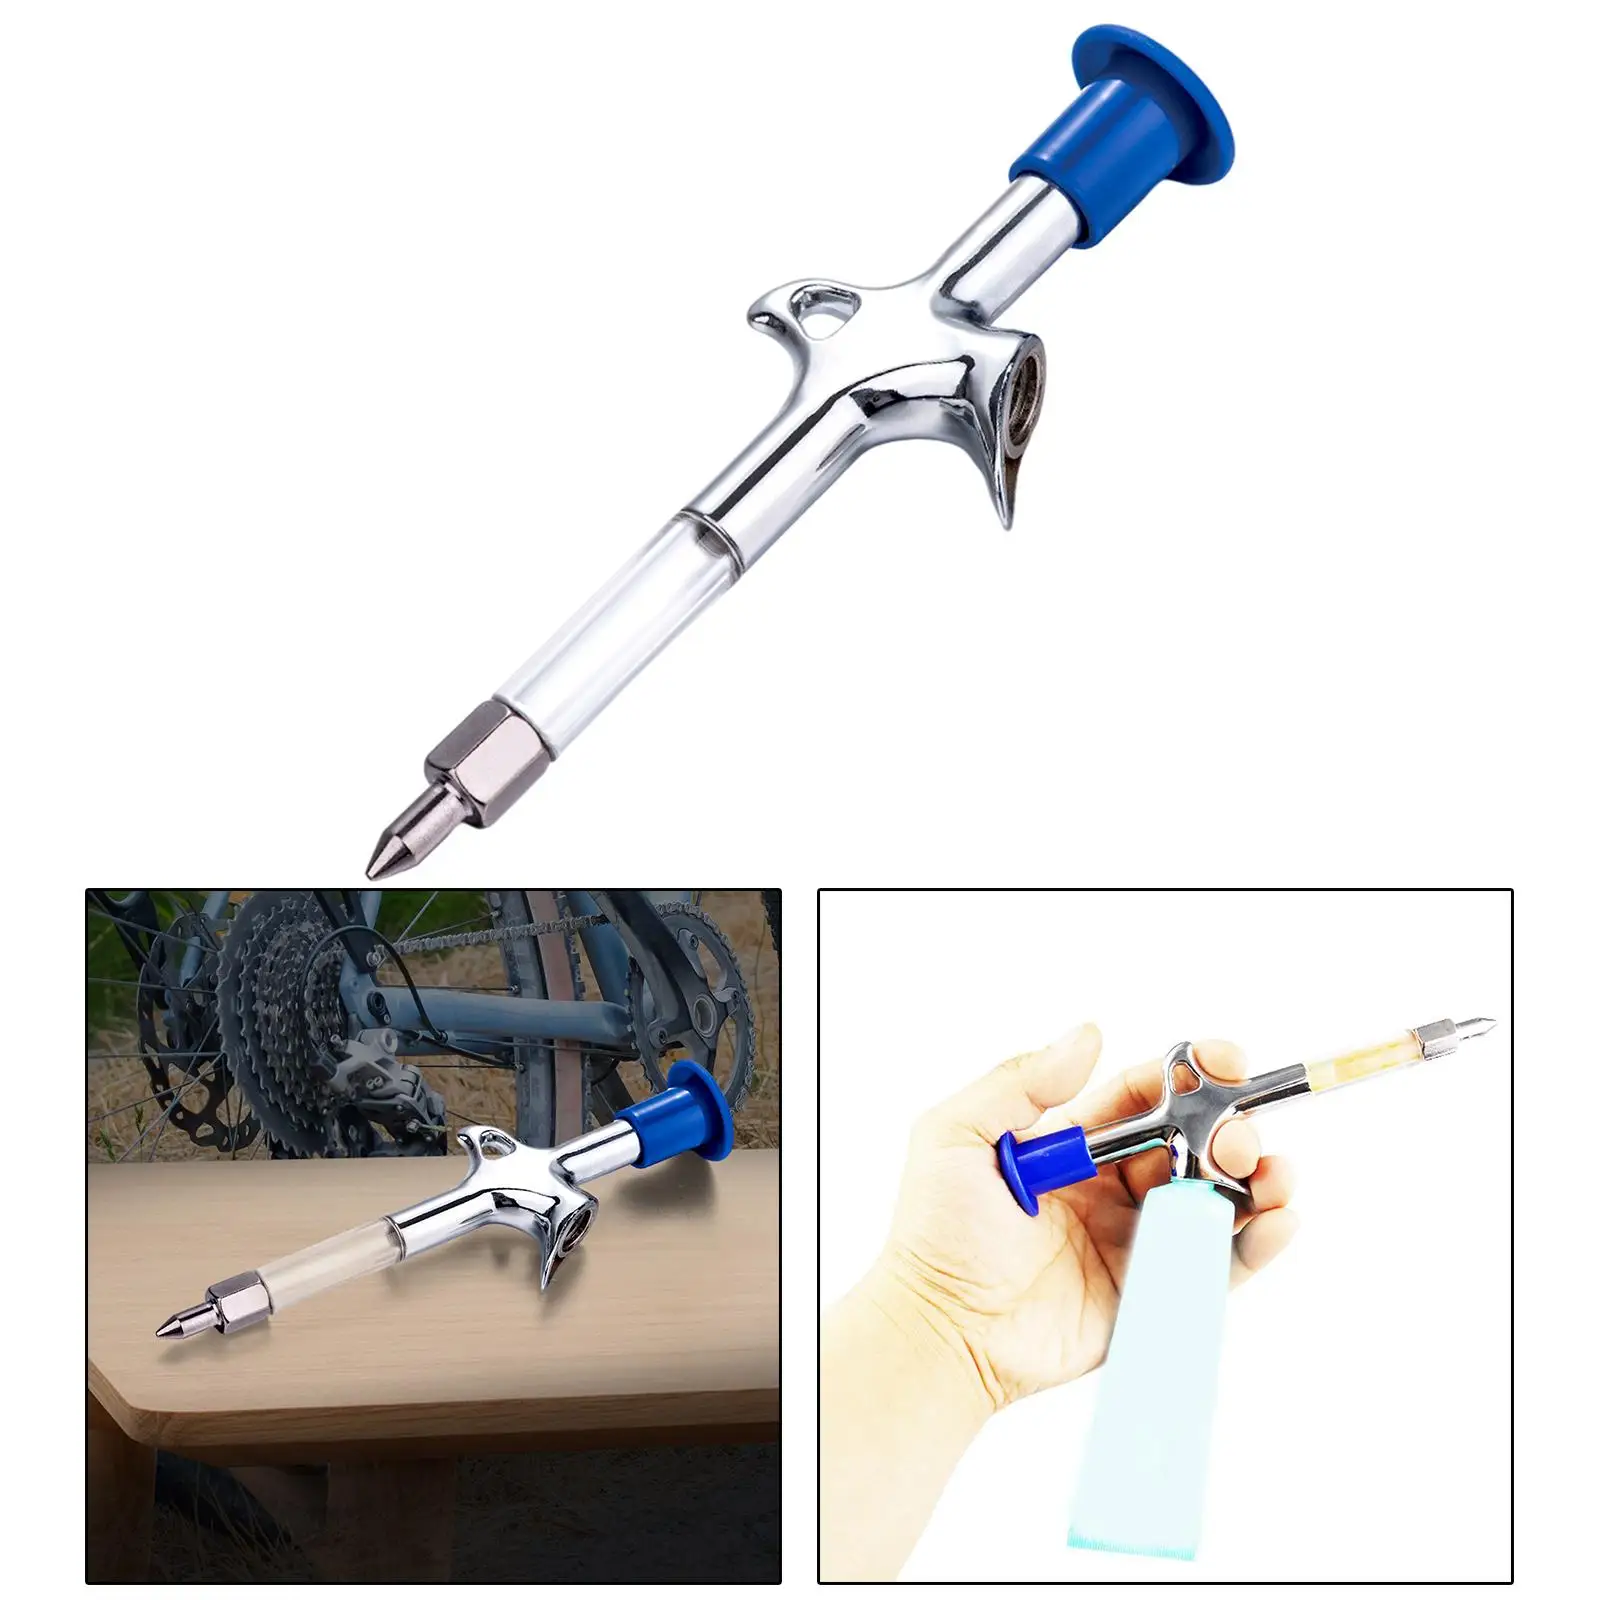 Bicycle Grease Injector Gun Tool for Bike Greasing Headset Bearings Nozzle Syringe Oiling